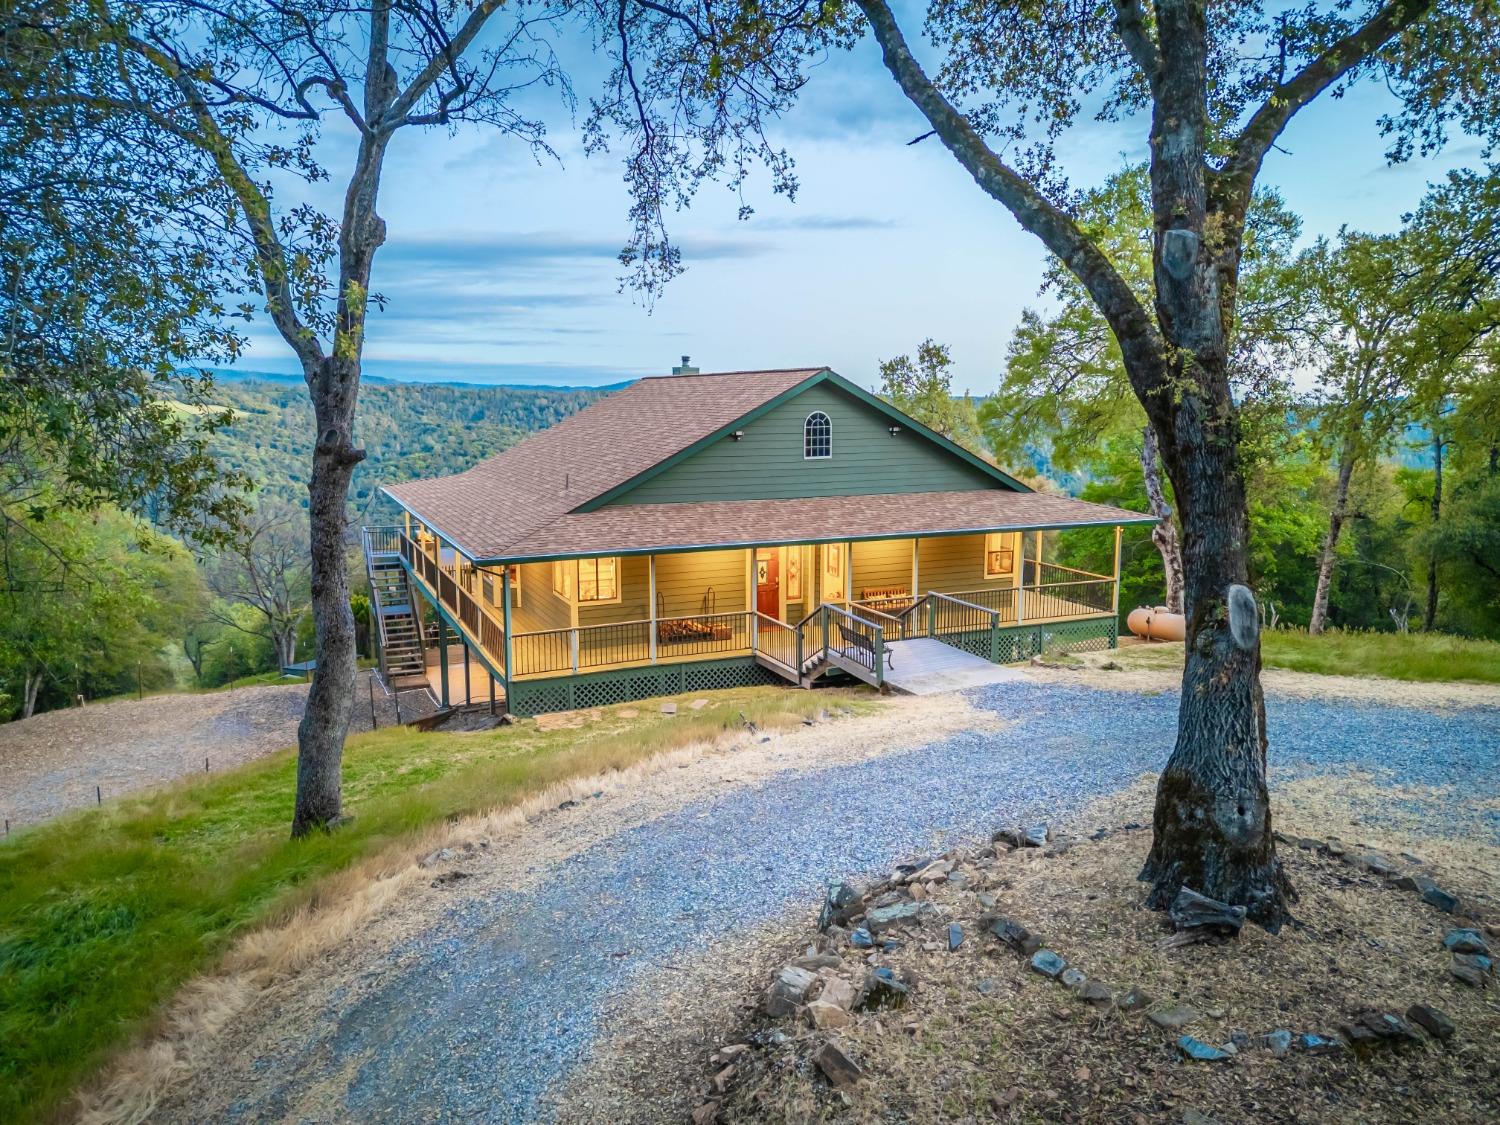 Photo of 6260 Lofty View Rd in Placerville, CA